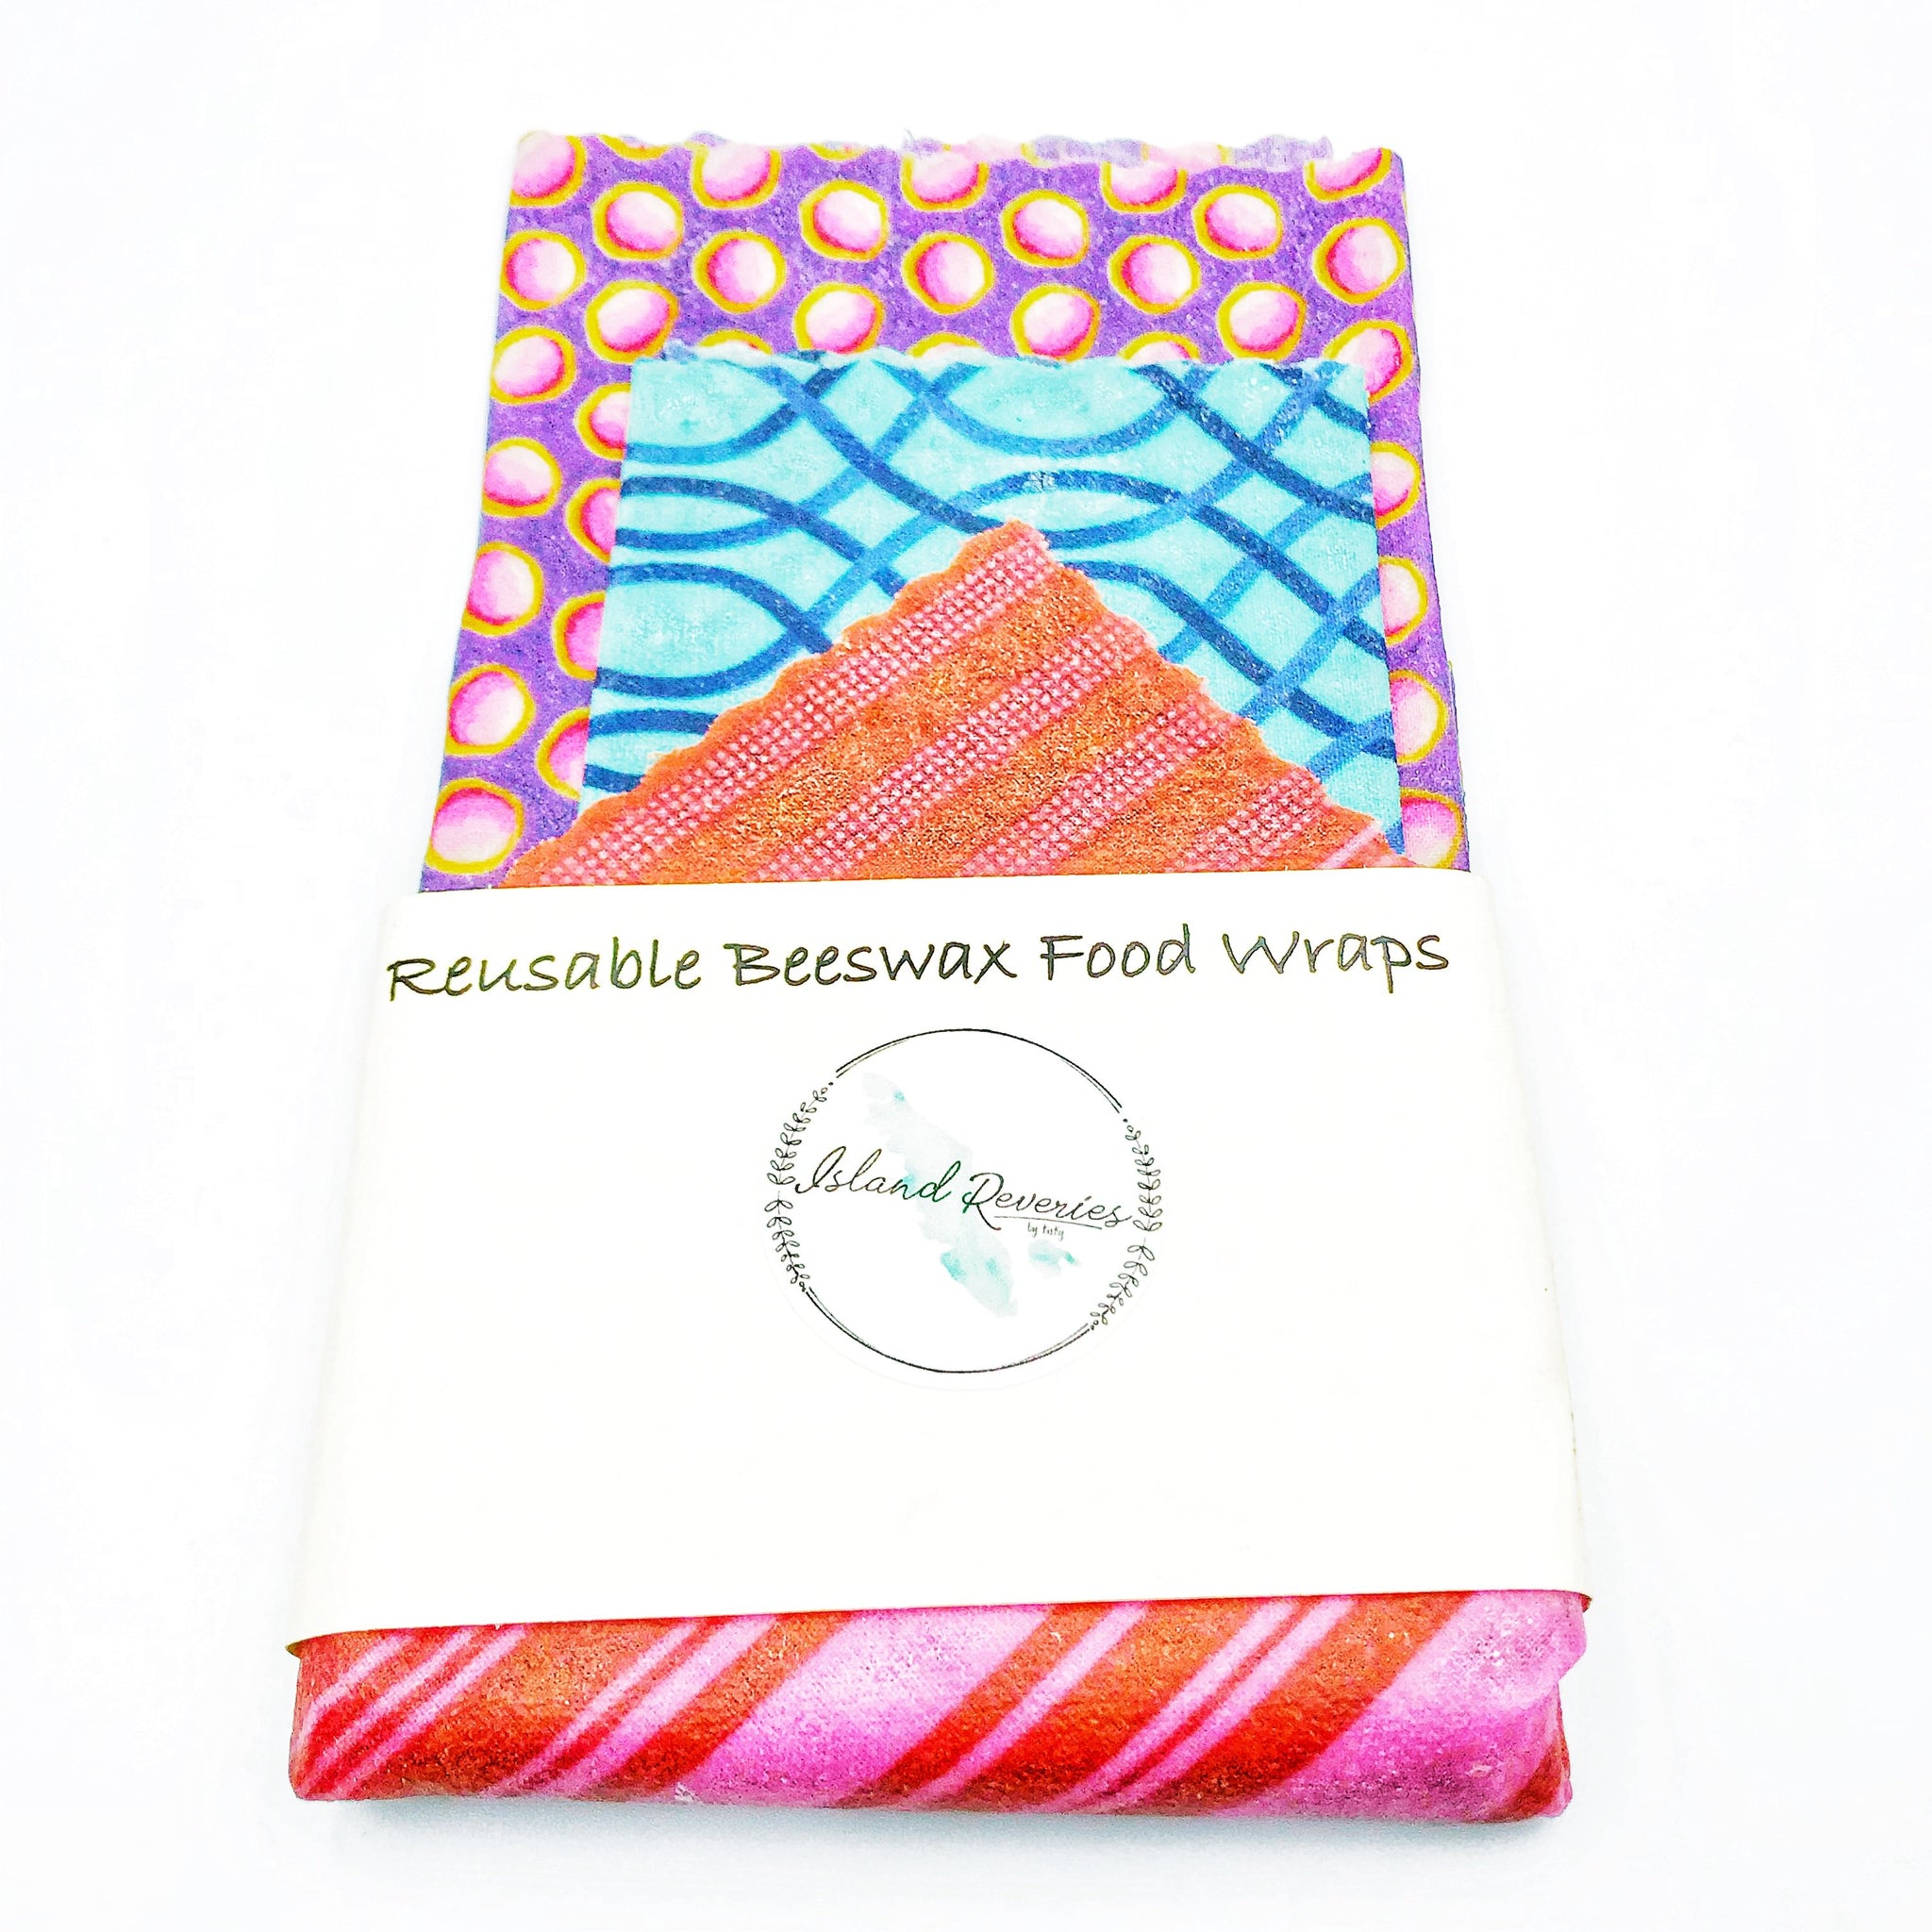 Island Reveries Reusable Beeswax Food Wraps ,Purple, Blue, Red